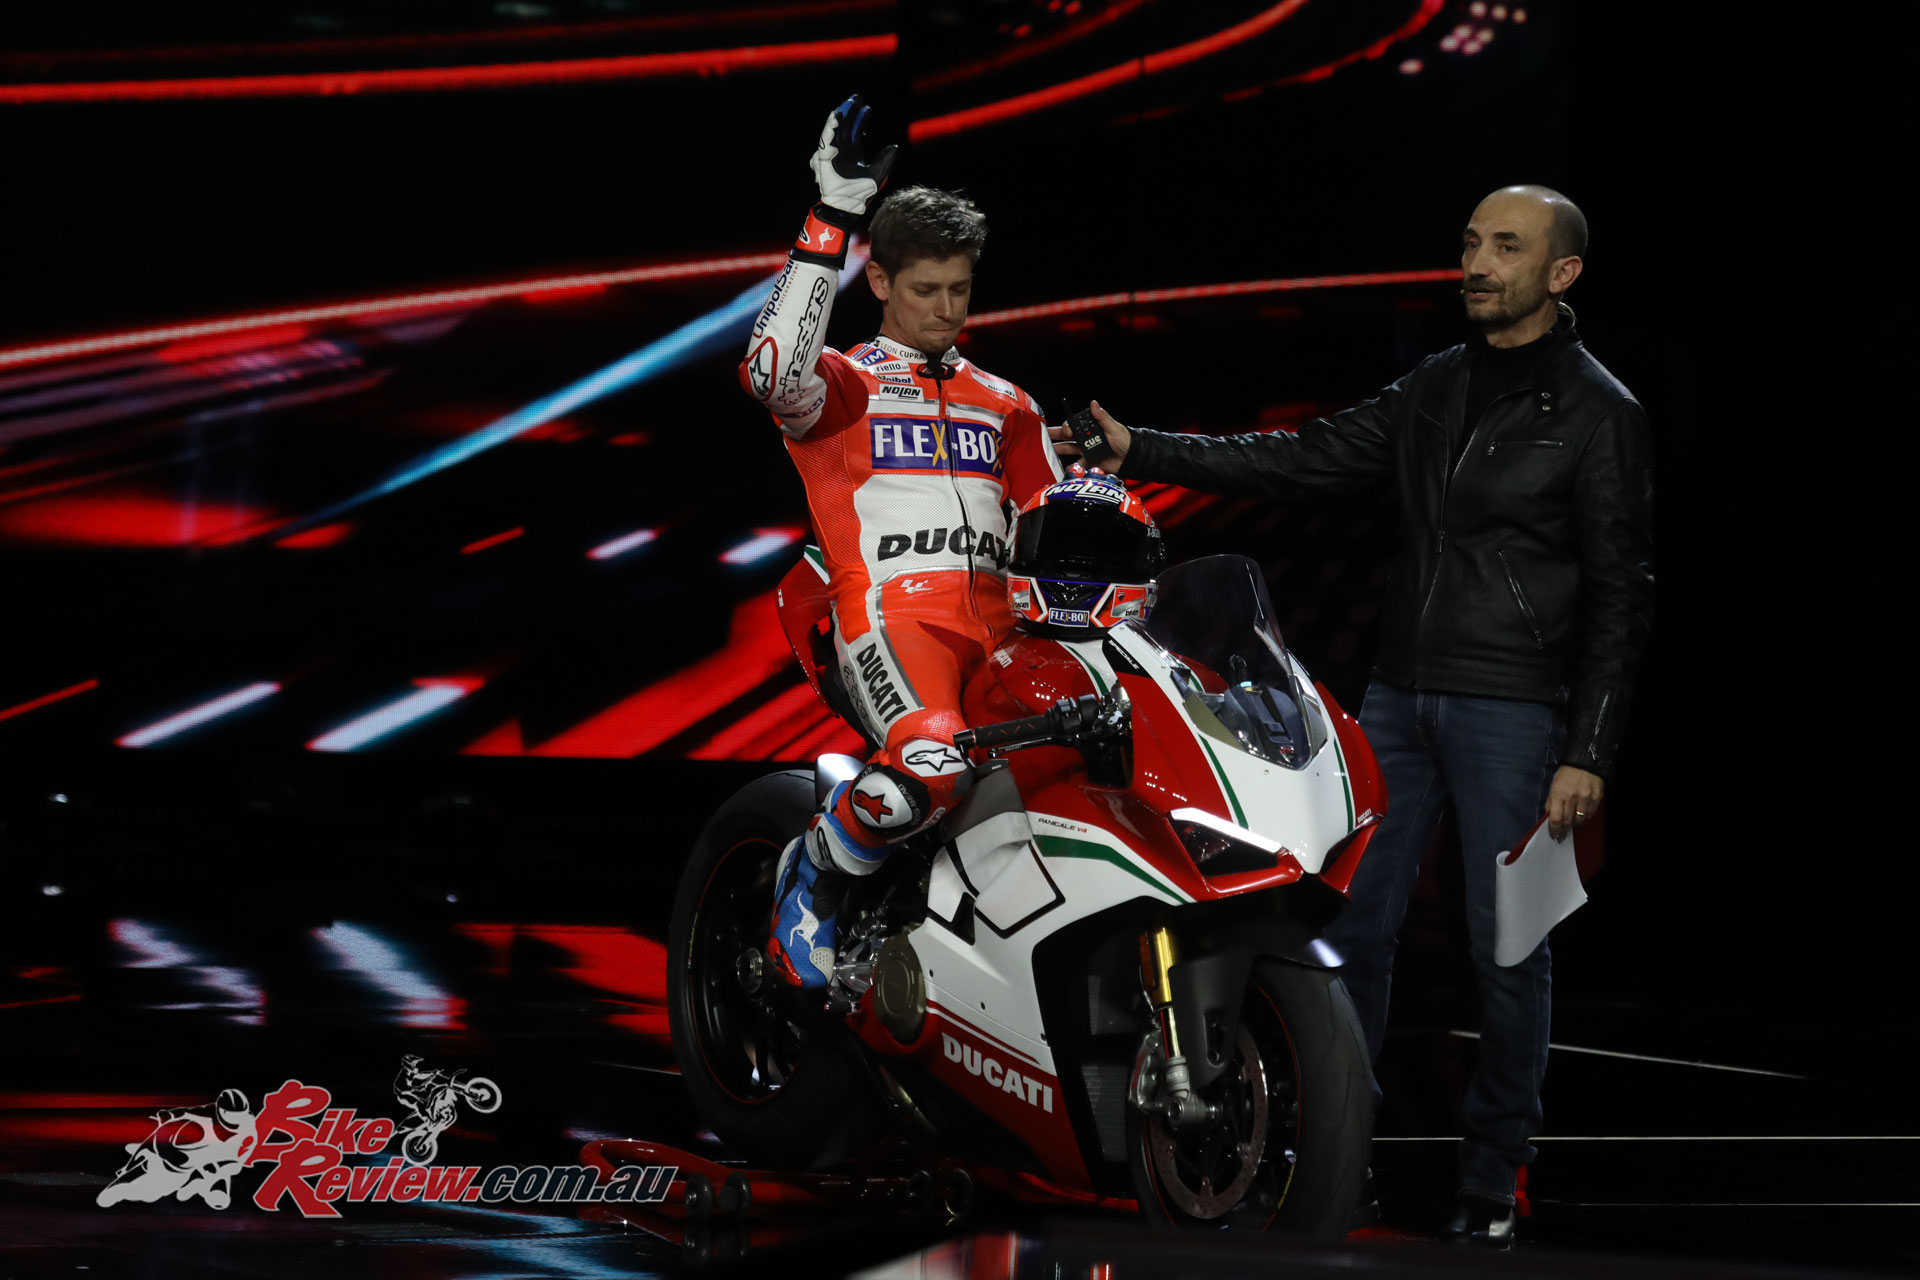 Casey Stoner brought out the limited edition Panigale V4 Speciale